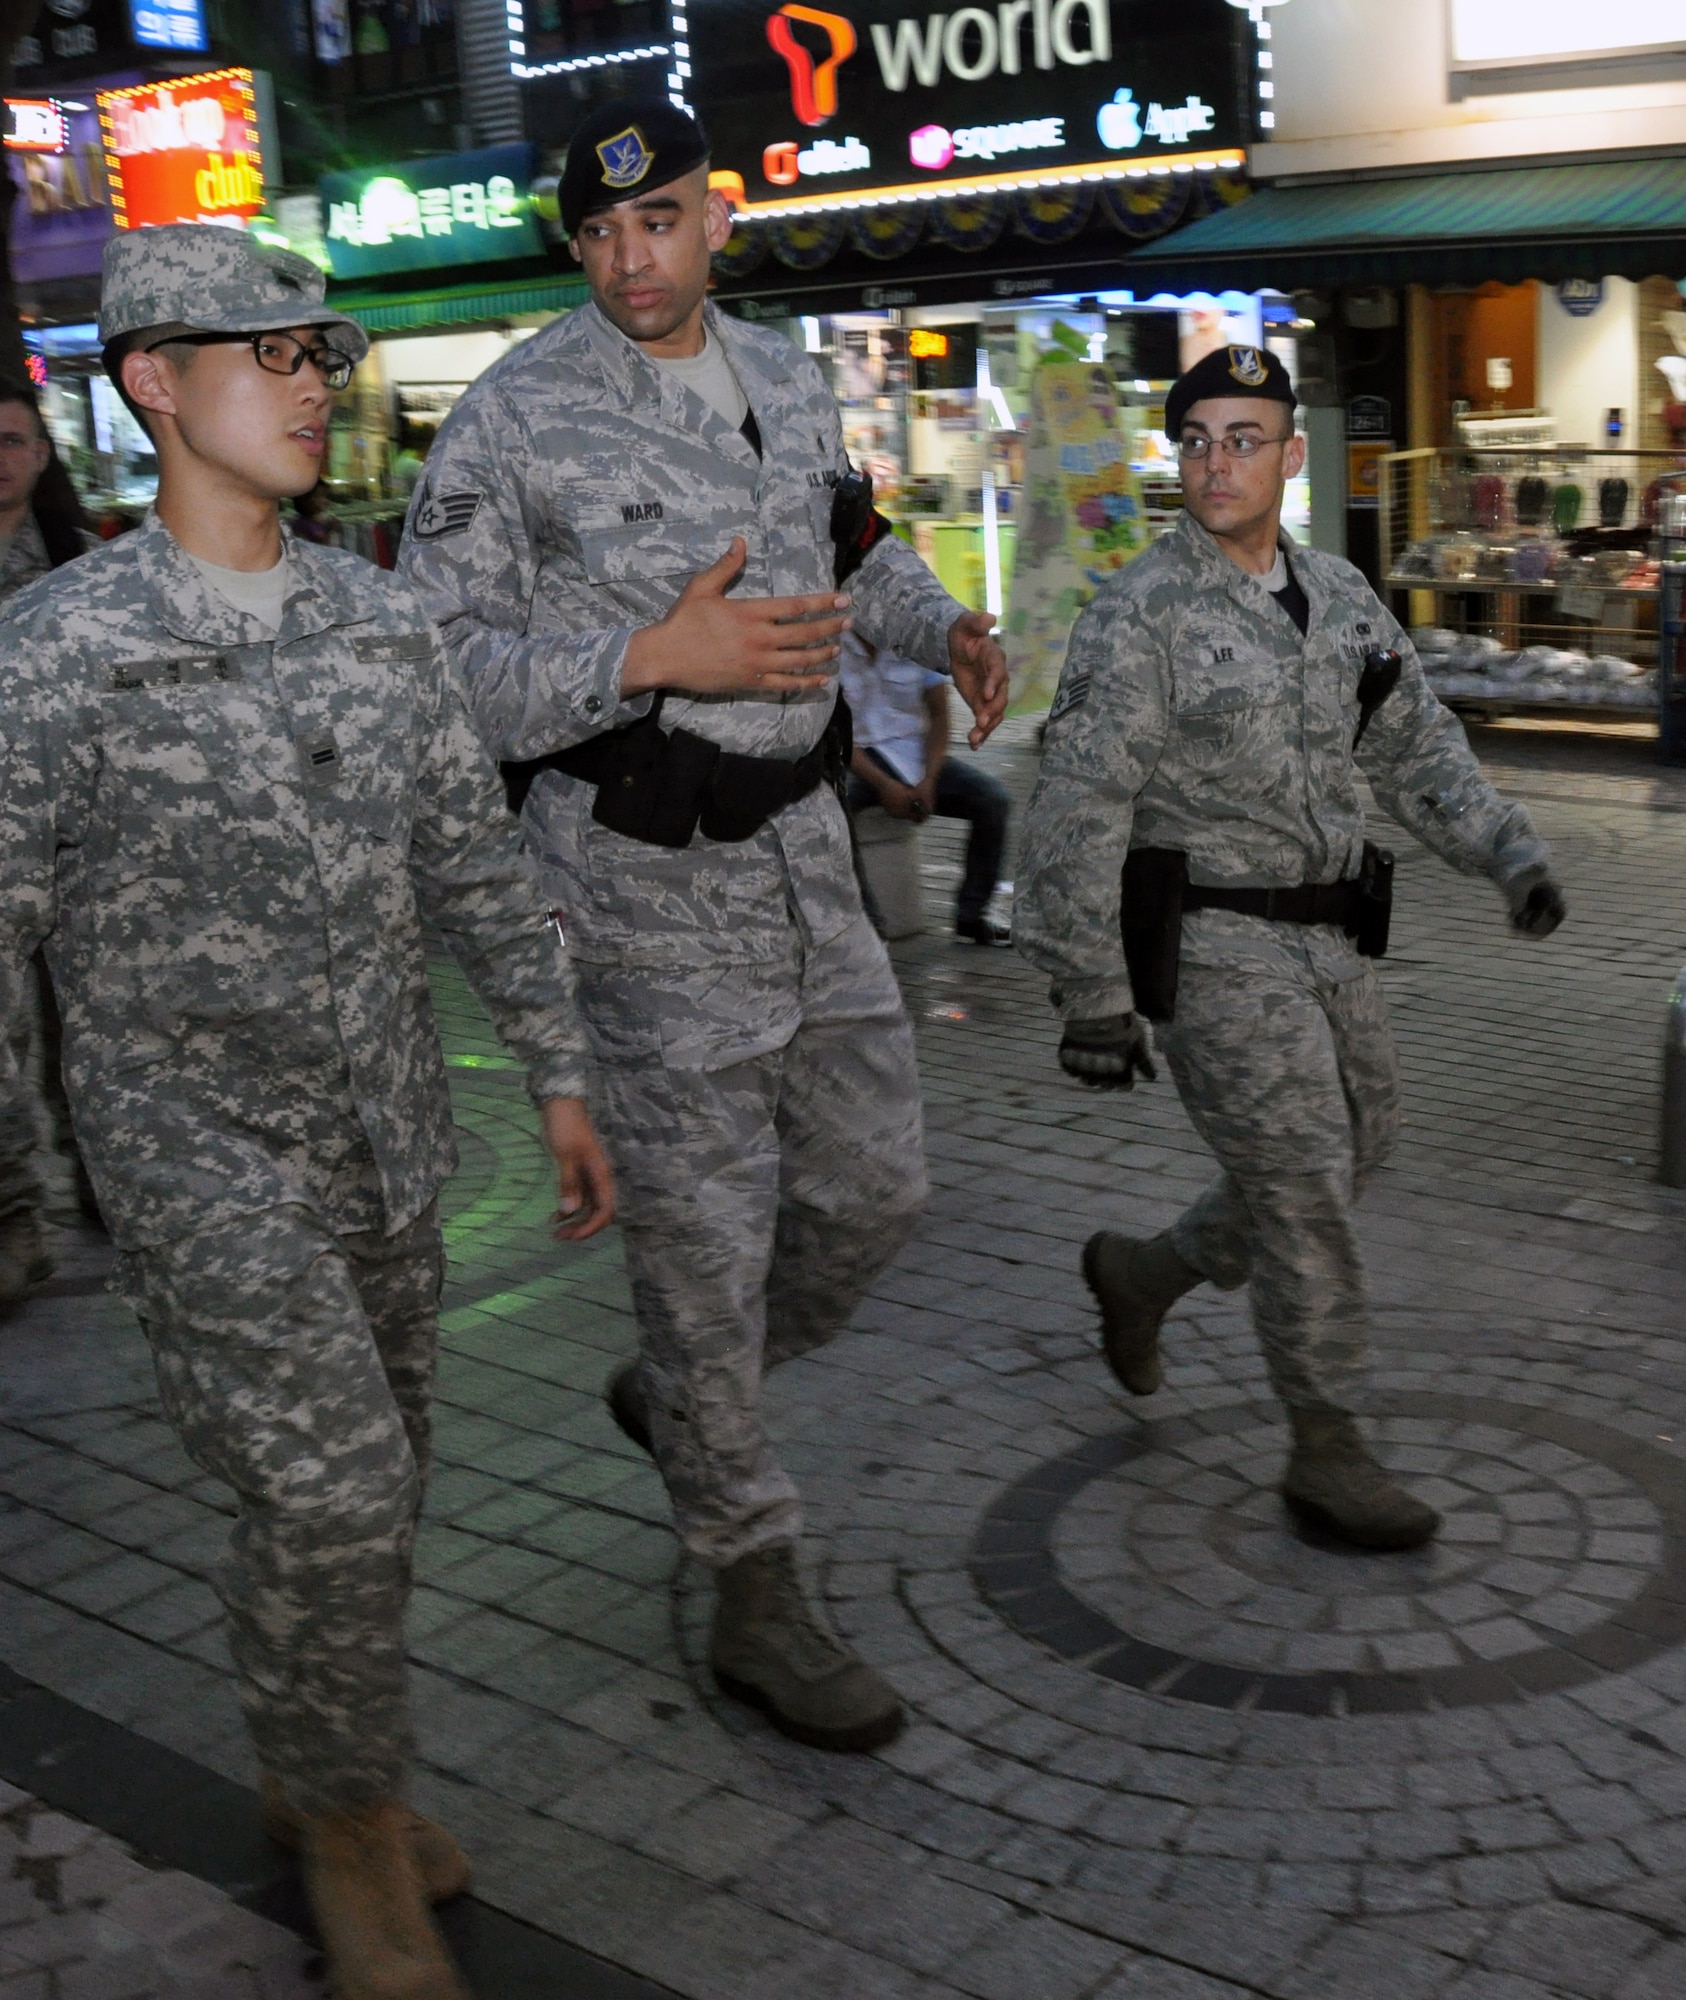 Staff Sergeants Gavin Ward and Cayman Lee, 51st Security Forces Squadron town patrolmen, explain the route and duties of town patrol to a Republic of Korea Army soldier during a routine town walkthrough, July 12, 2012.  This is the first time that the 51st Security Forces Squadron has worked with Korean Augmentees to the U.S. Army in their patrols. KATUSAs will act as translators between Korean locals and U.S. service members. (U.S. Air Force photo/Senior Airman Michael Battles)